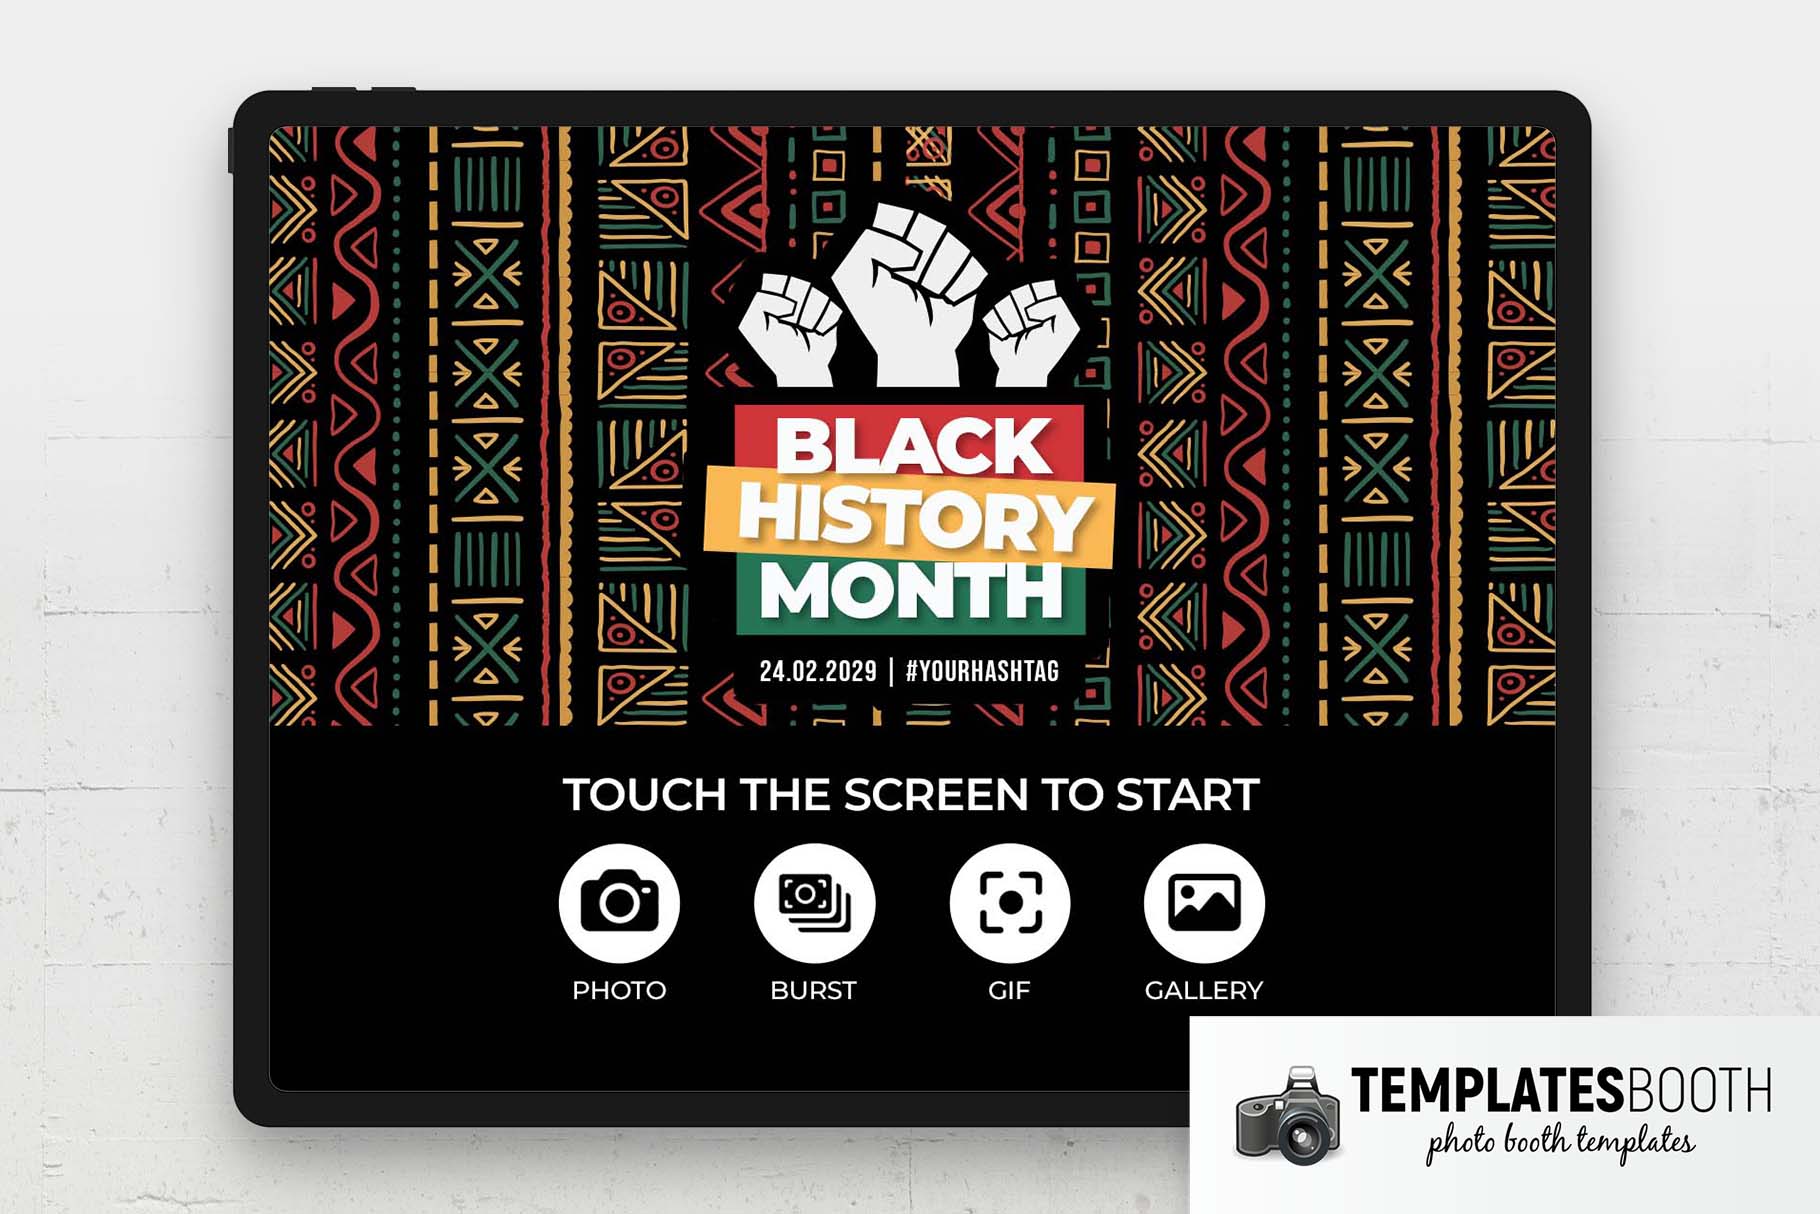 Black History Month Photo Booth Welcome Screen